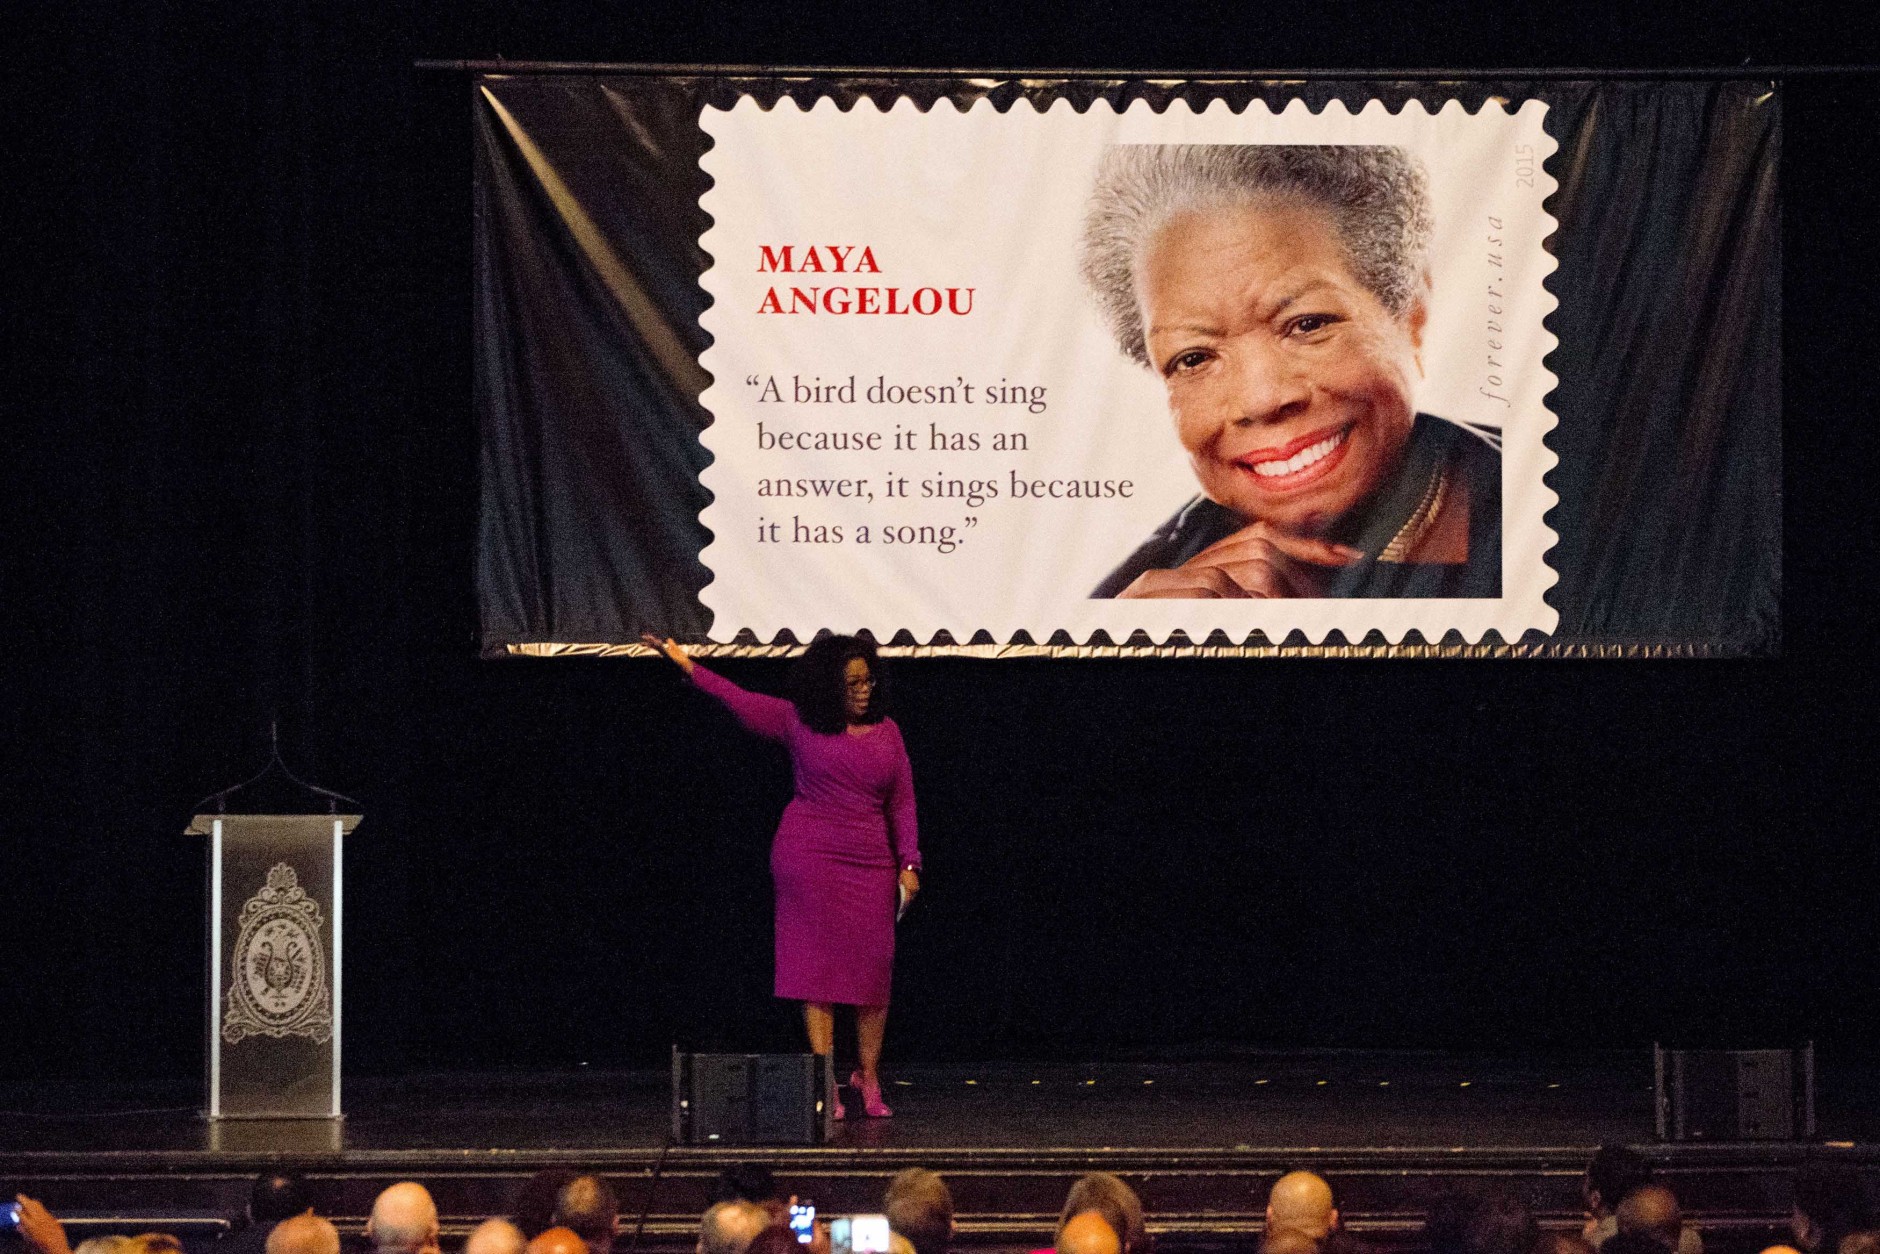 Oprah Winfrey gestures up as the lights go out during her speech at the unveiling of the Maya Angelou Forever Stamp, Tuesday, April 7, 2015, at the Warner Theater  in Washington. The White House, State Department, and Capitol were all affected by reports of widespread power outages across Washington and its suburbs Tuesday afternoon.  (AP Photo/Jacquelyn Martin)